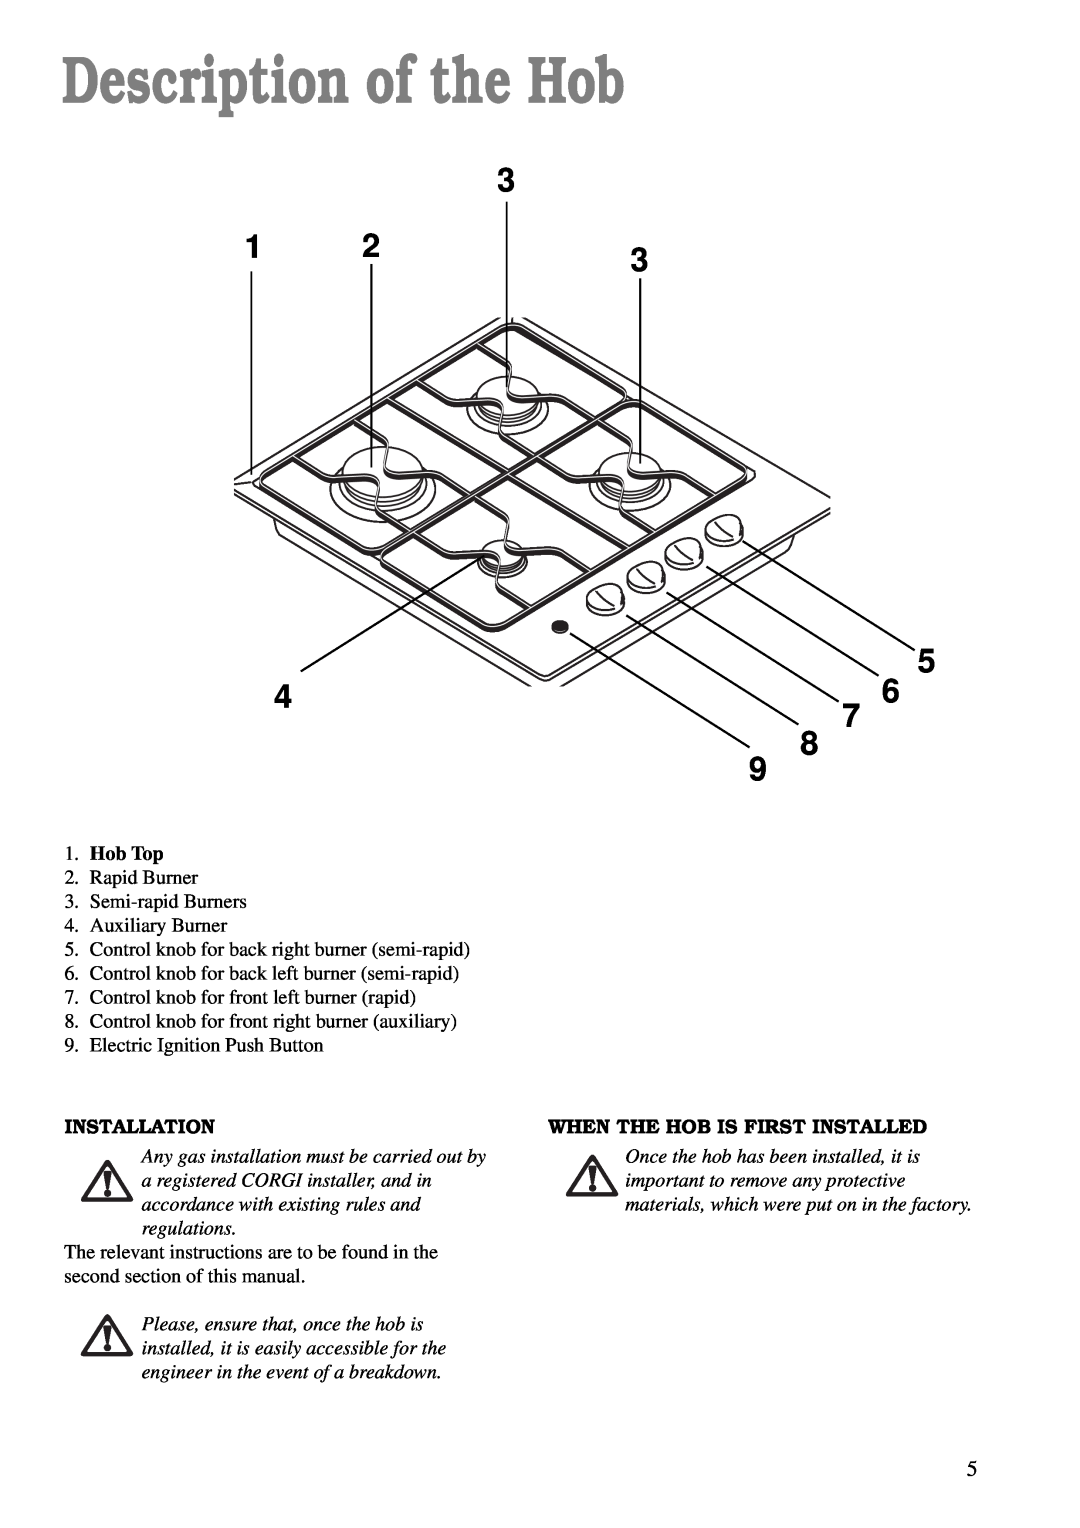 Tricity Bendix TBG 640 manual Description of the Hob, Hob Top, Installation, When The Hob Is First Installed 